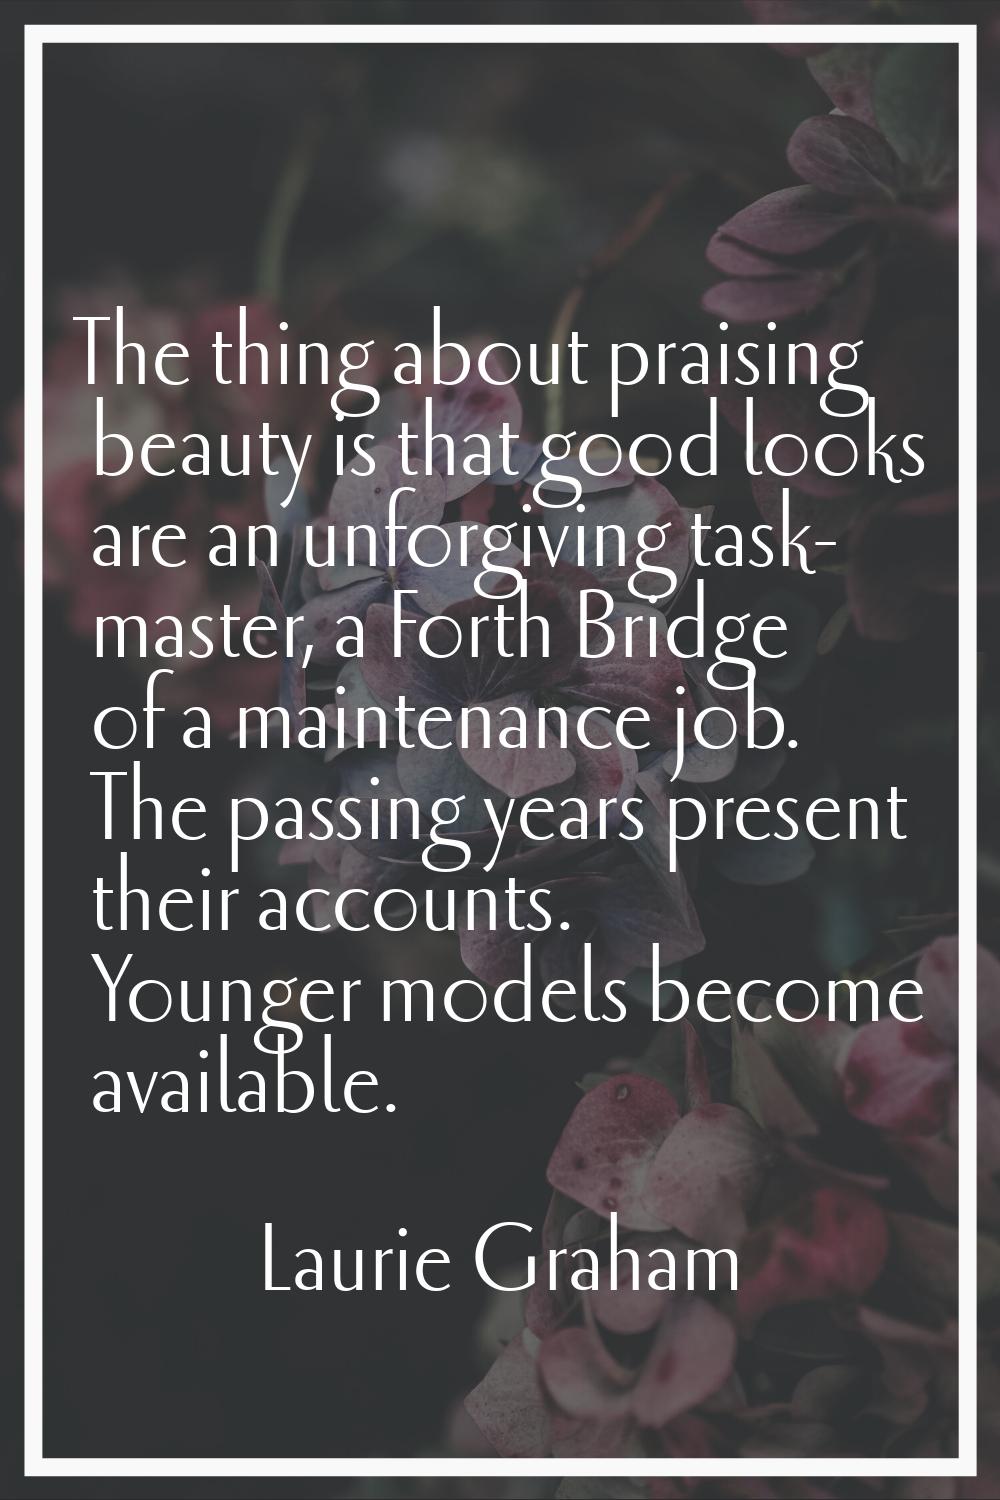 The thing about praising beauty is that good looks are an unforgiving task- master, a Forth Bridge 